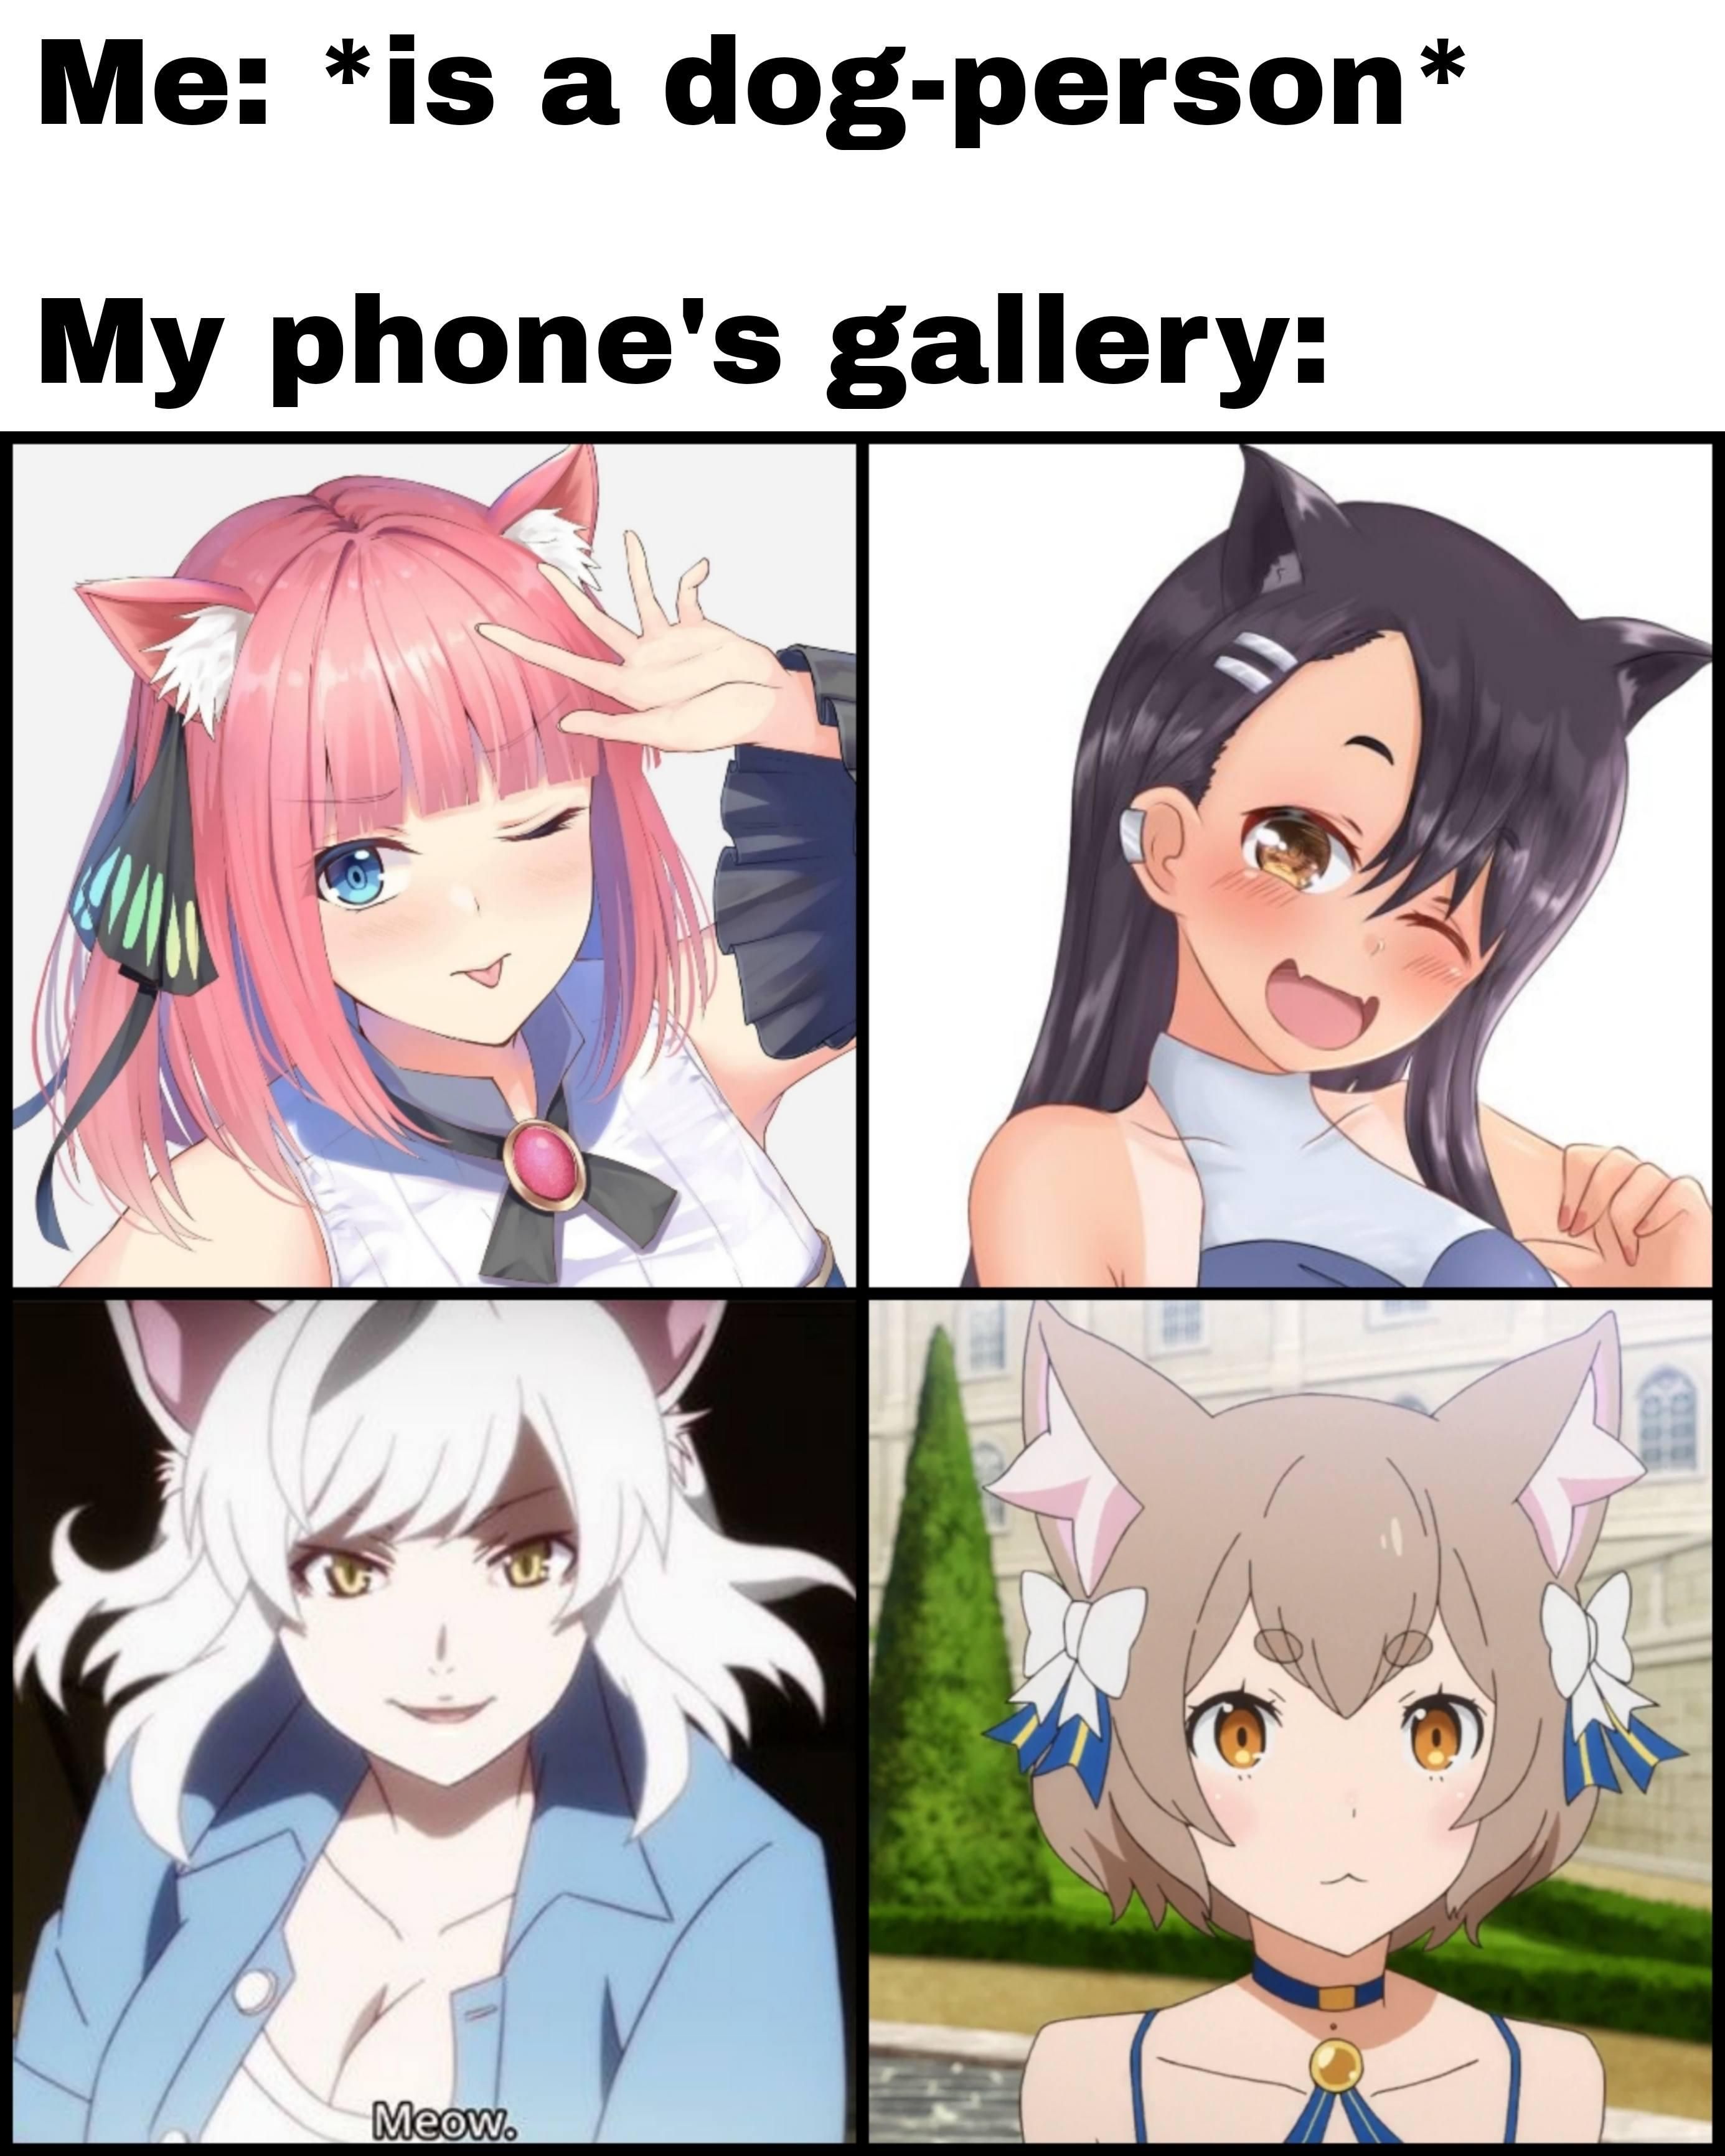 Catgirls are adorable